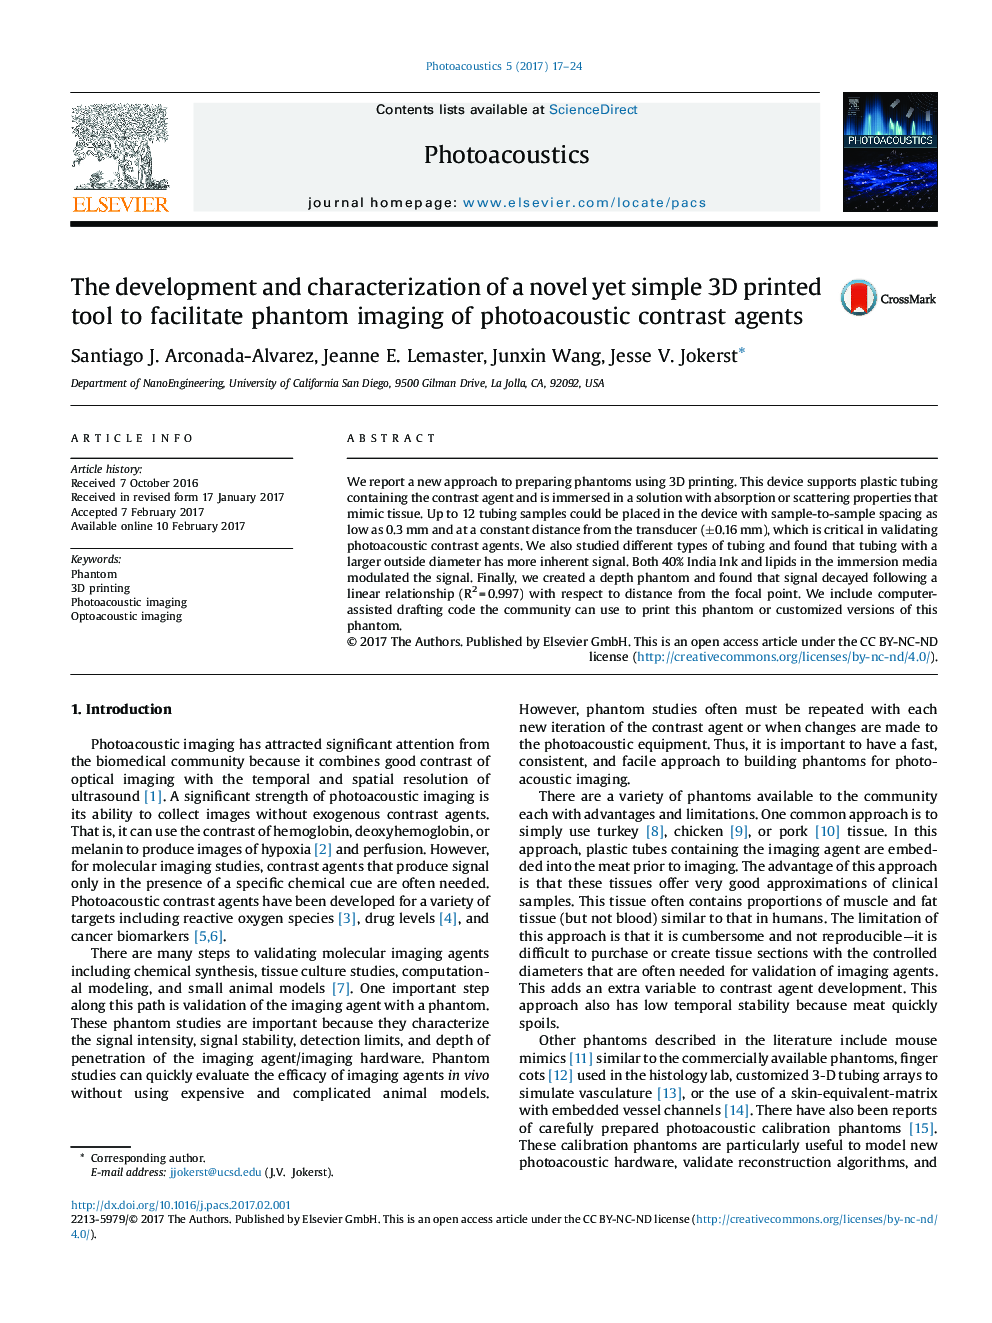 The development and characterization of a novel yet simple 3D printed tool to facilitate phantom imaging of photoacoustic contrast agents